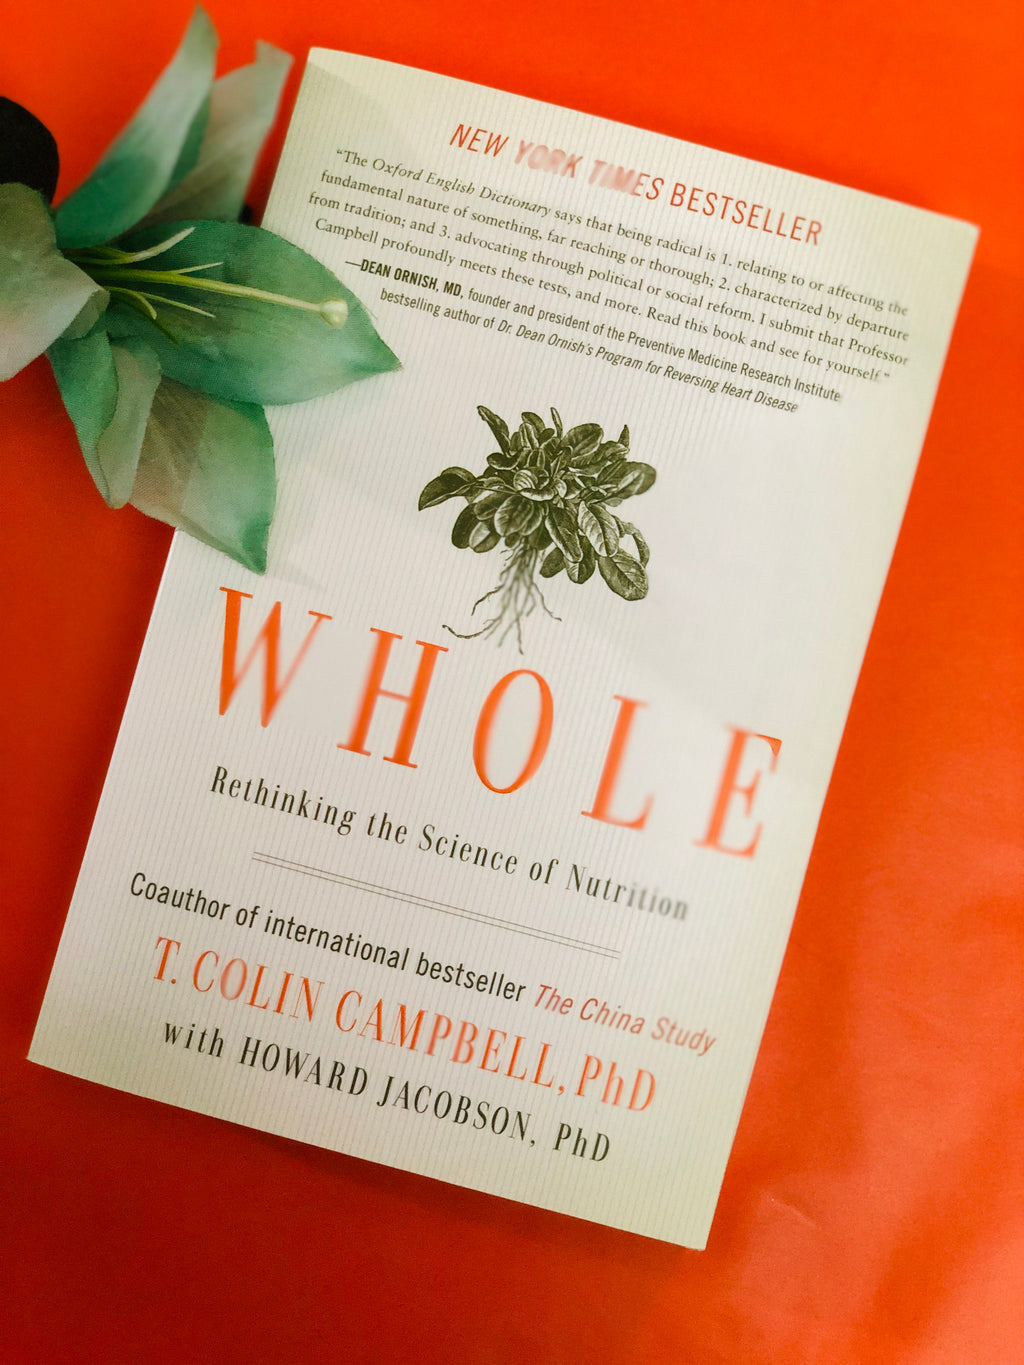 Whole, Rethinking the Science of Nutrition by T. Colin Campbell, PhD